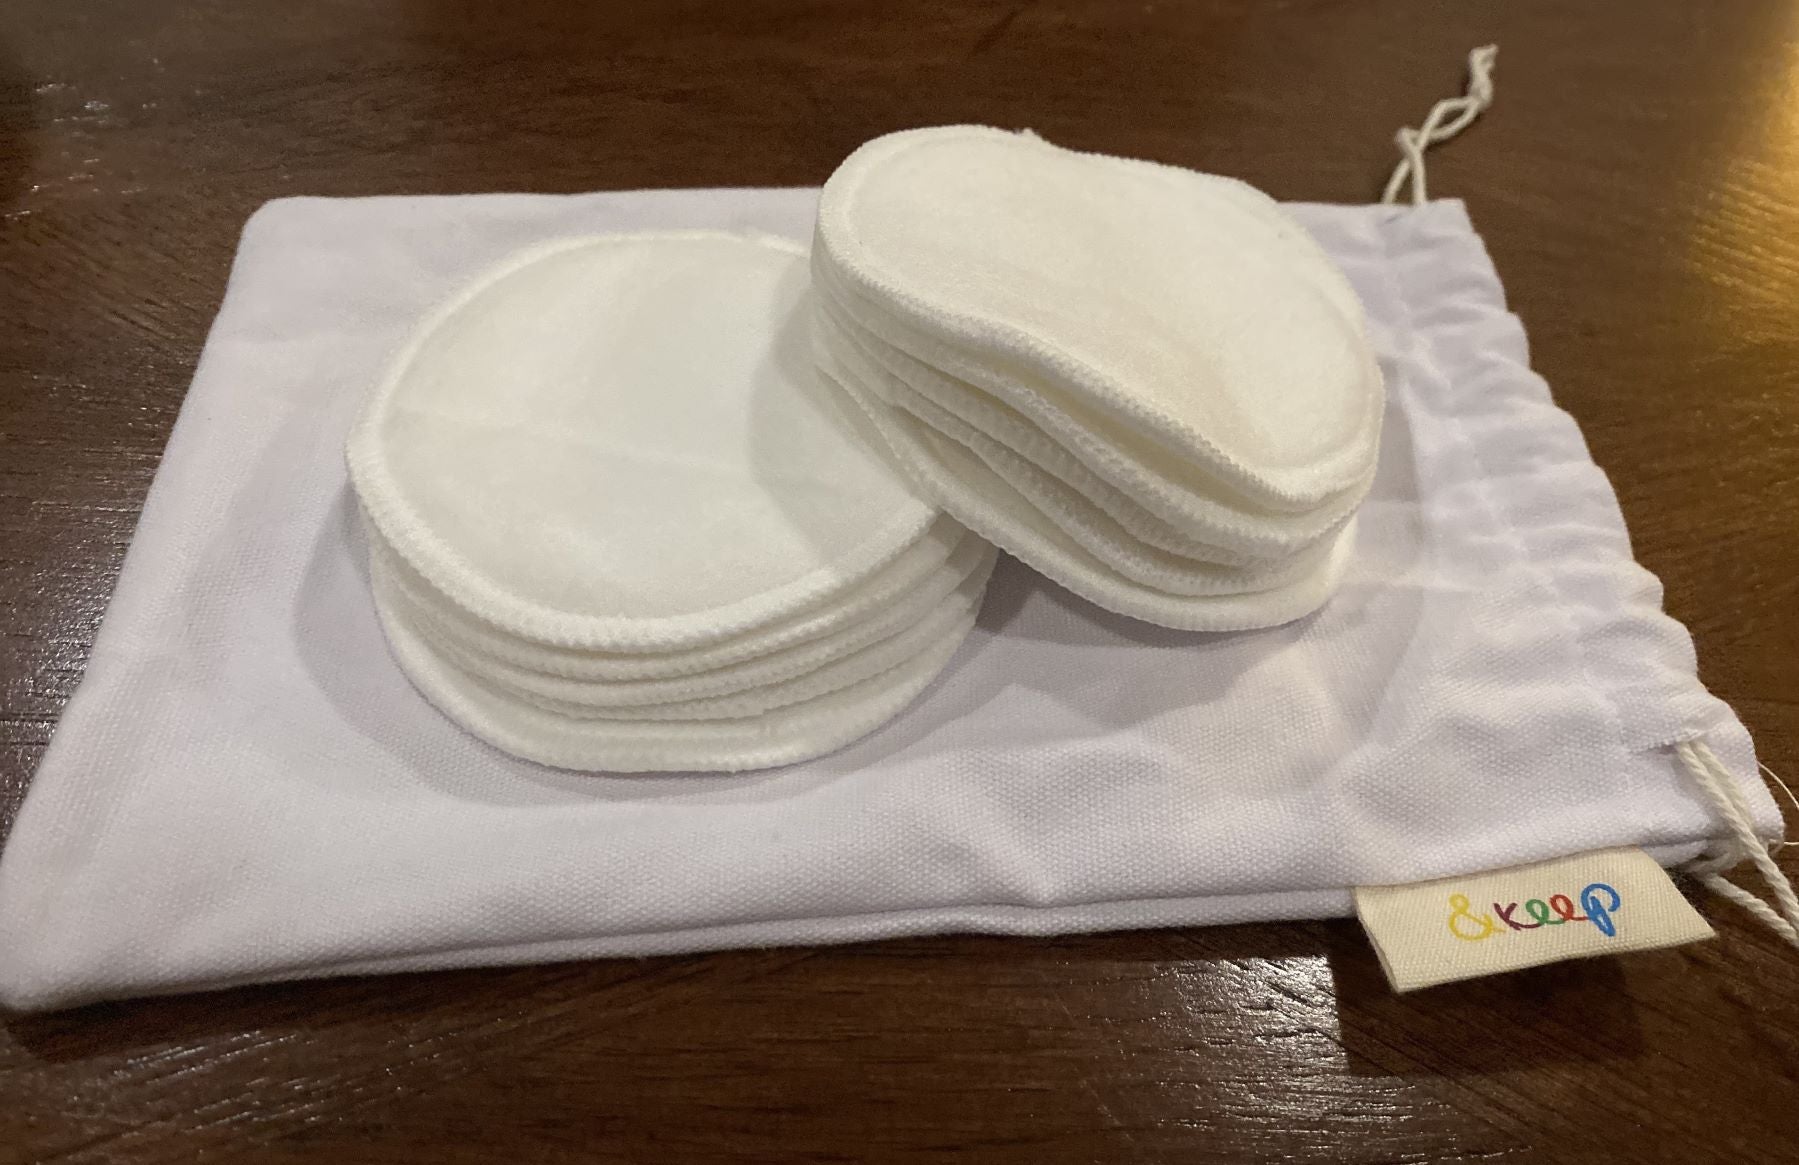 10 Reusable Soft Bamboo & Cotton Make-Up Pads in Cotton with Cotton Storage Bag, Eco-Friendly Product, Plastic-Free